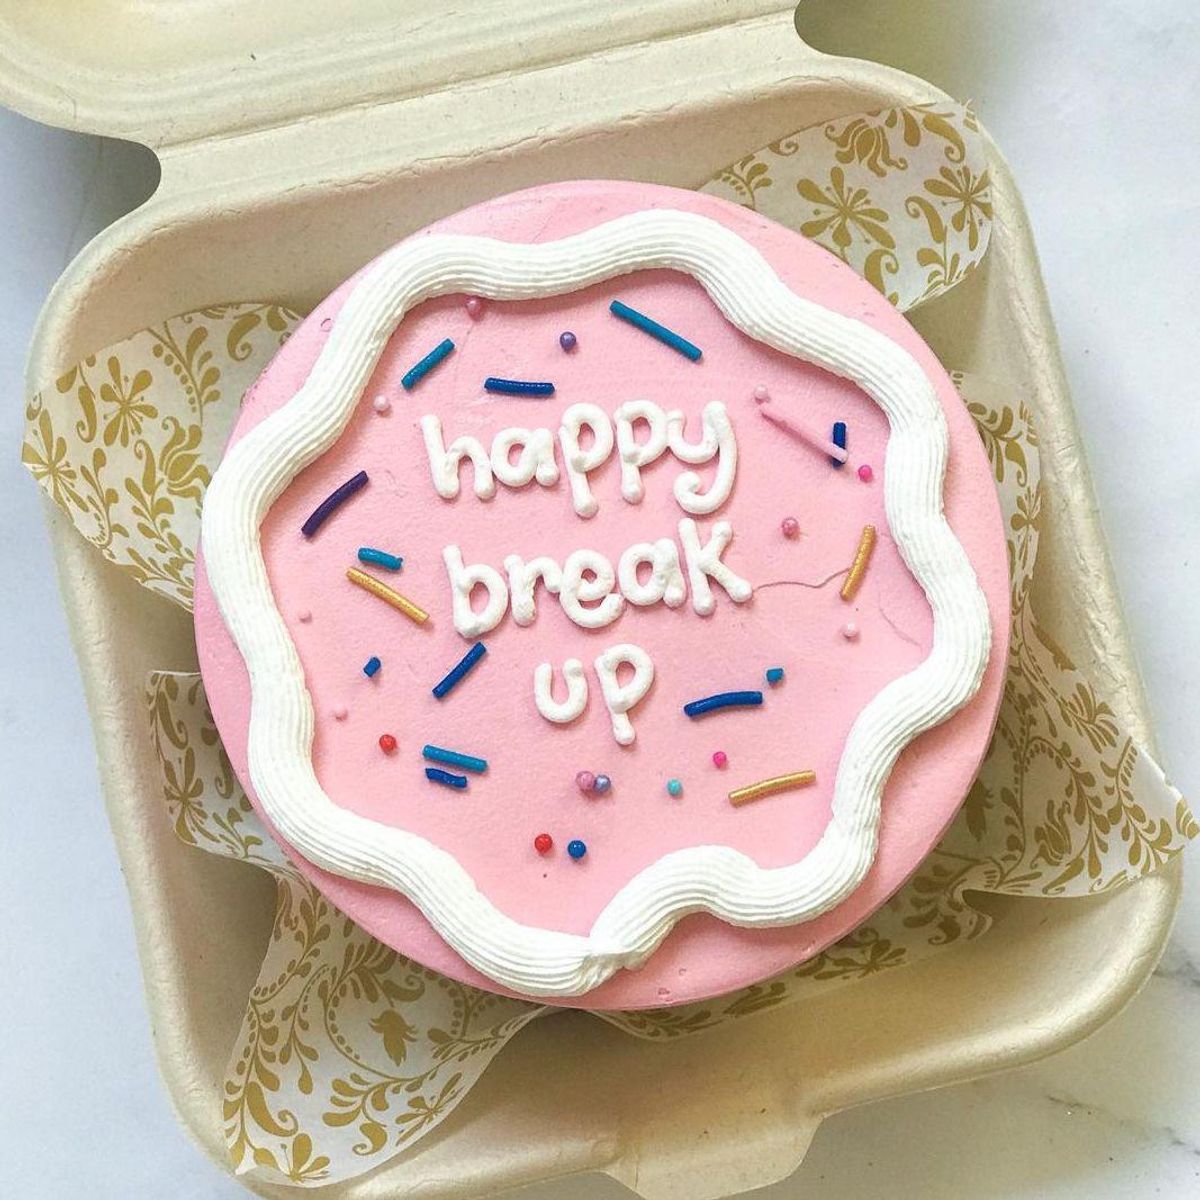 breakup cake ideas pink and white frosting with colorful sprinkles